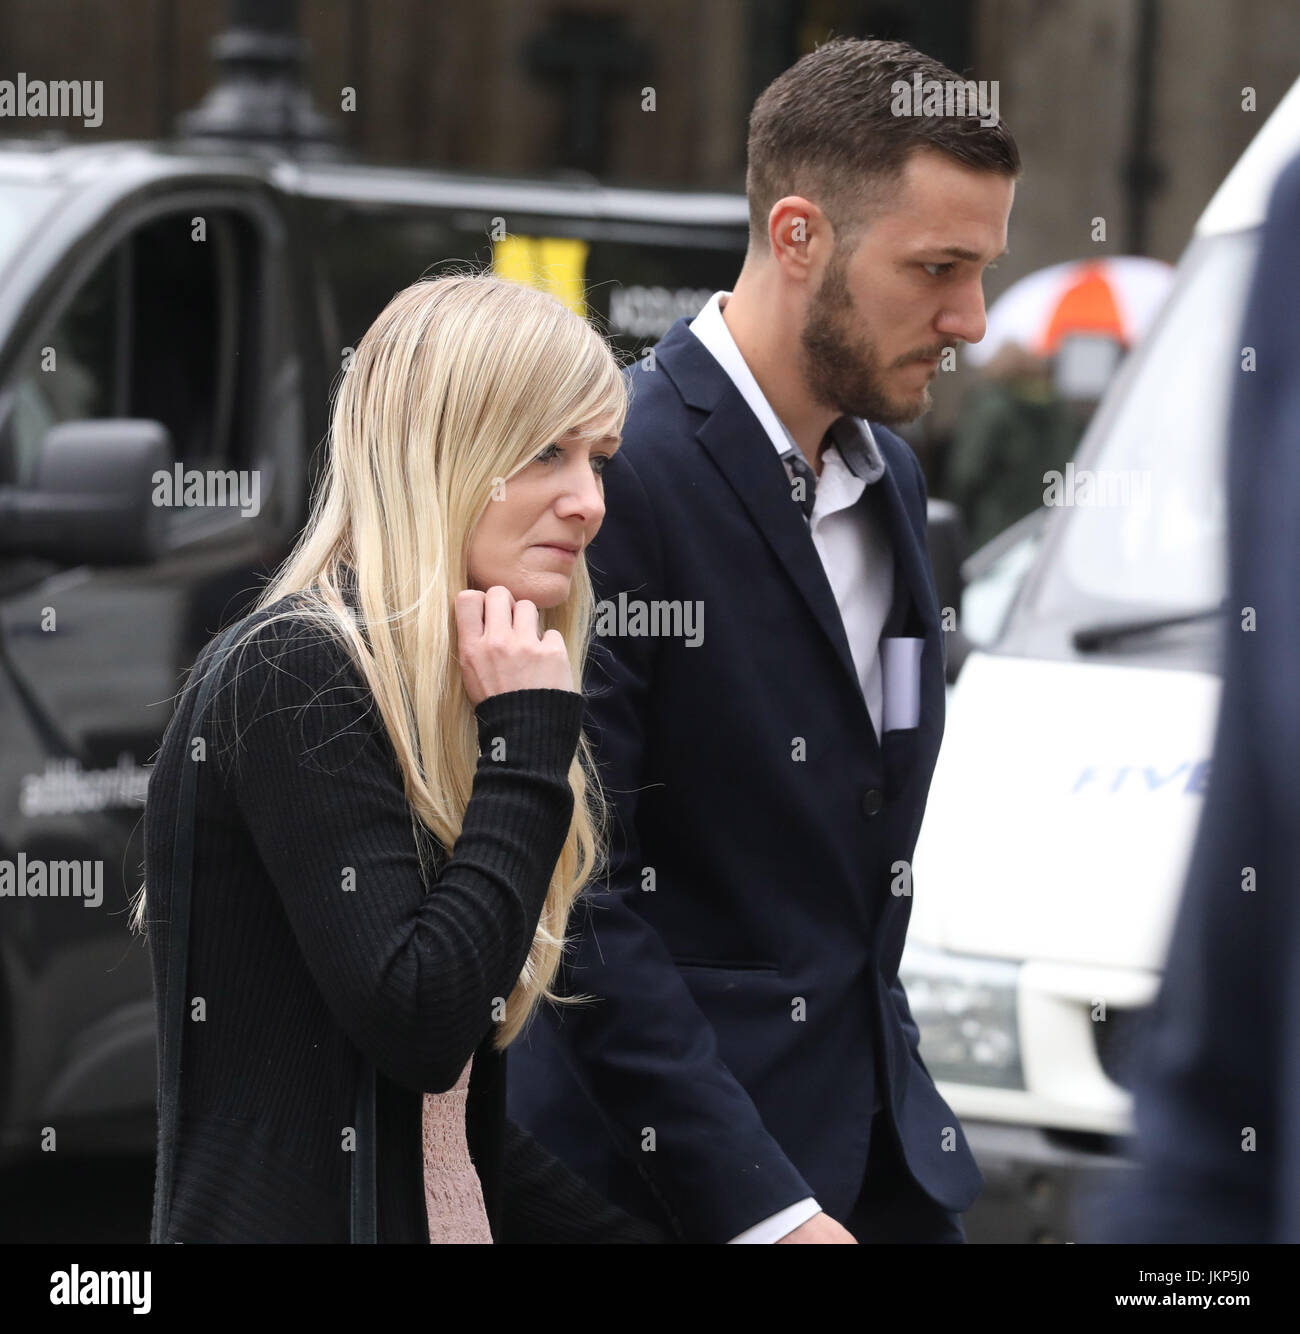 London, UK. 24th July, 2017. Pic shows:  24.7.17 High Court London Charlie Gard parents Connie Yates and Chris Gard emotional as they arrive to packed press corps and cheers of supporters    Pic by Gavin Rodgers/Pixel 8000 Ltd Credit: Gavin Rodgers/Alamy Live News Credit: Gavin Rodgers/Alamy Live News Stock Photo